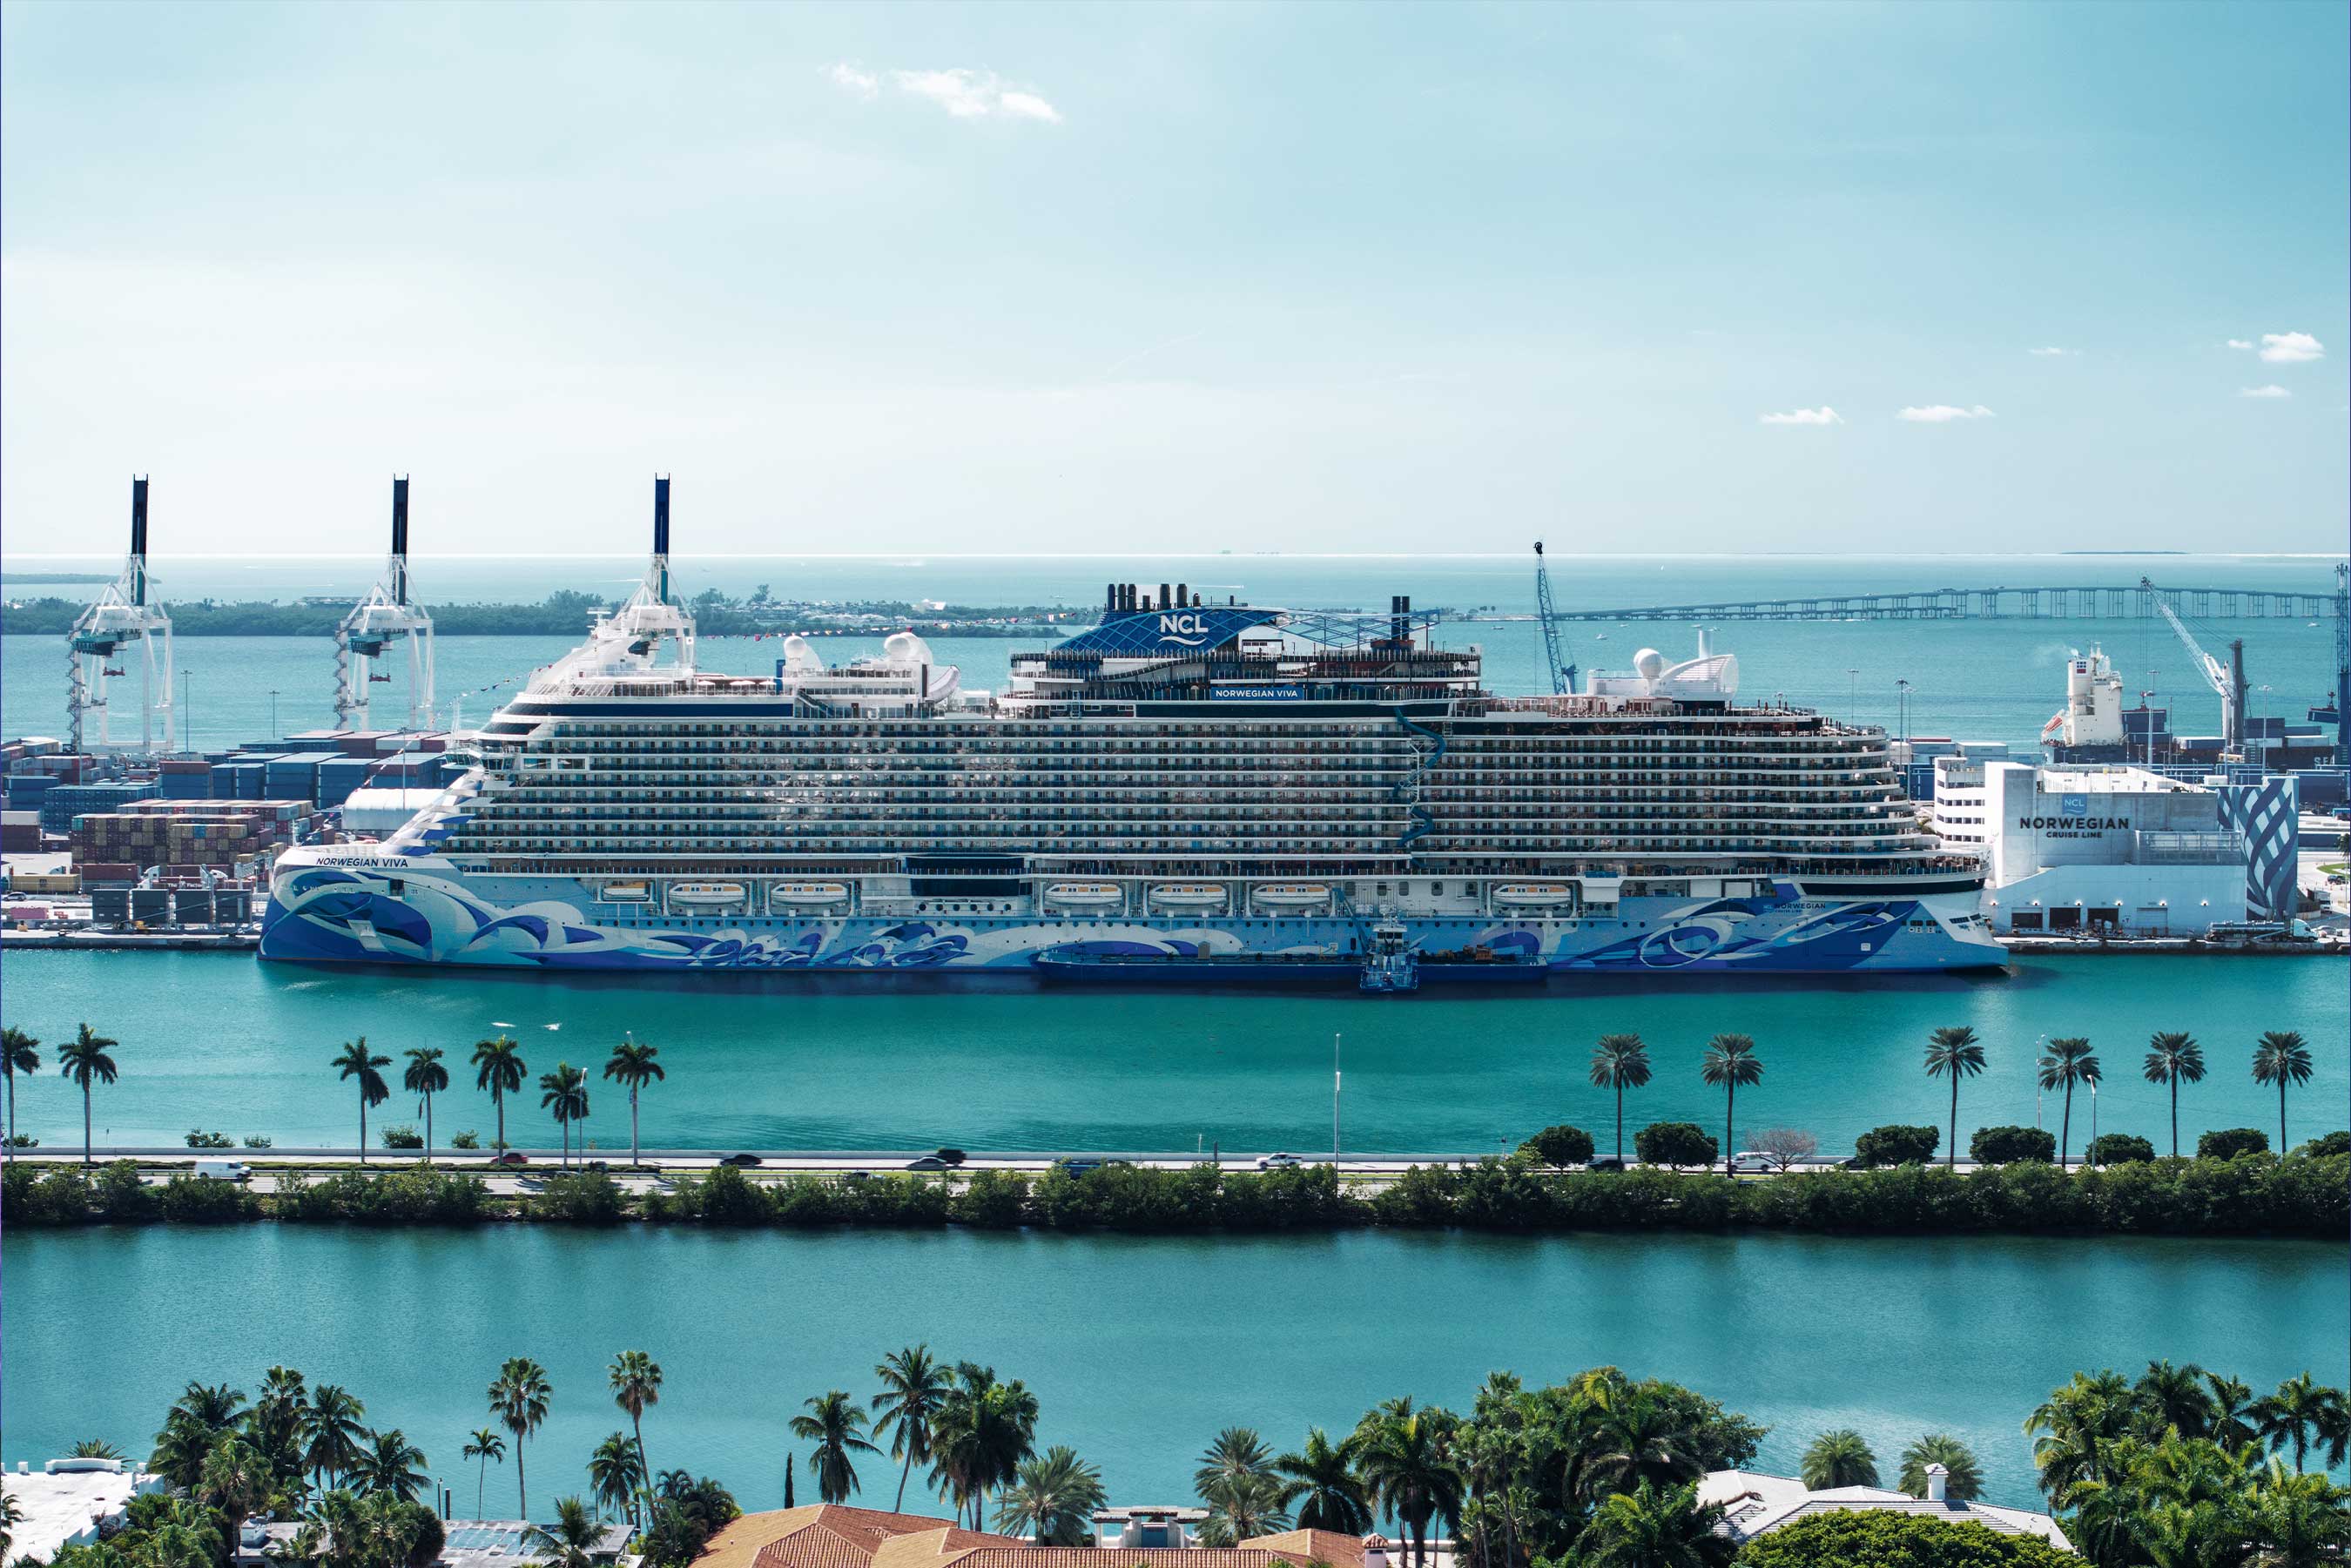 On Nov. 28, 2023, Norwegian Cruise Line christened the highly anticipated Norwegian Viva, the second ship in the award-winning Prima Class. The milestone event took place in the Company’s LEED® Gold Certified terminal at PortMiami, the ‘Cruise Capital of the World’, with over 1,500 guests in attendance.